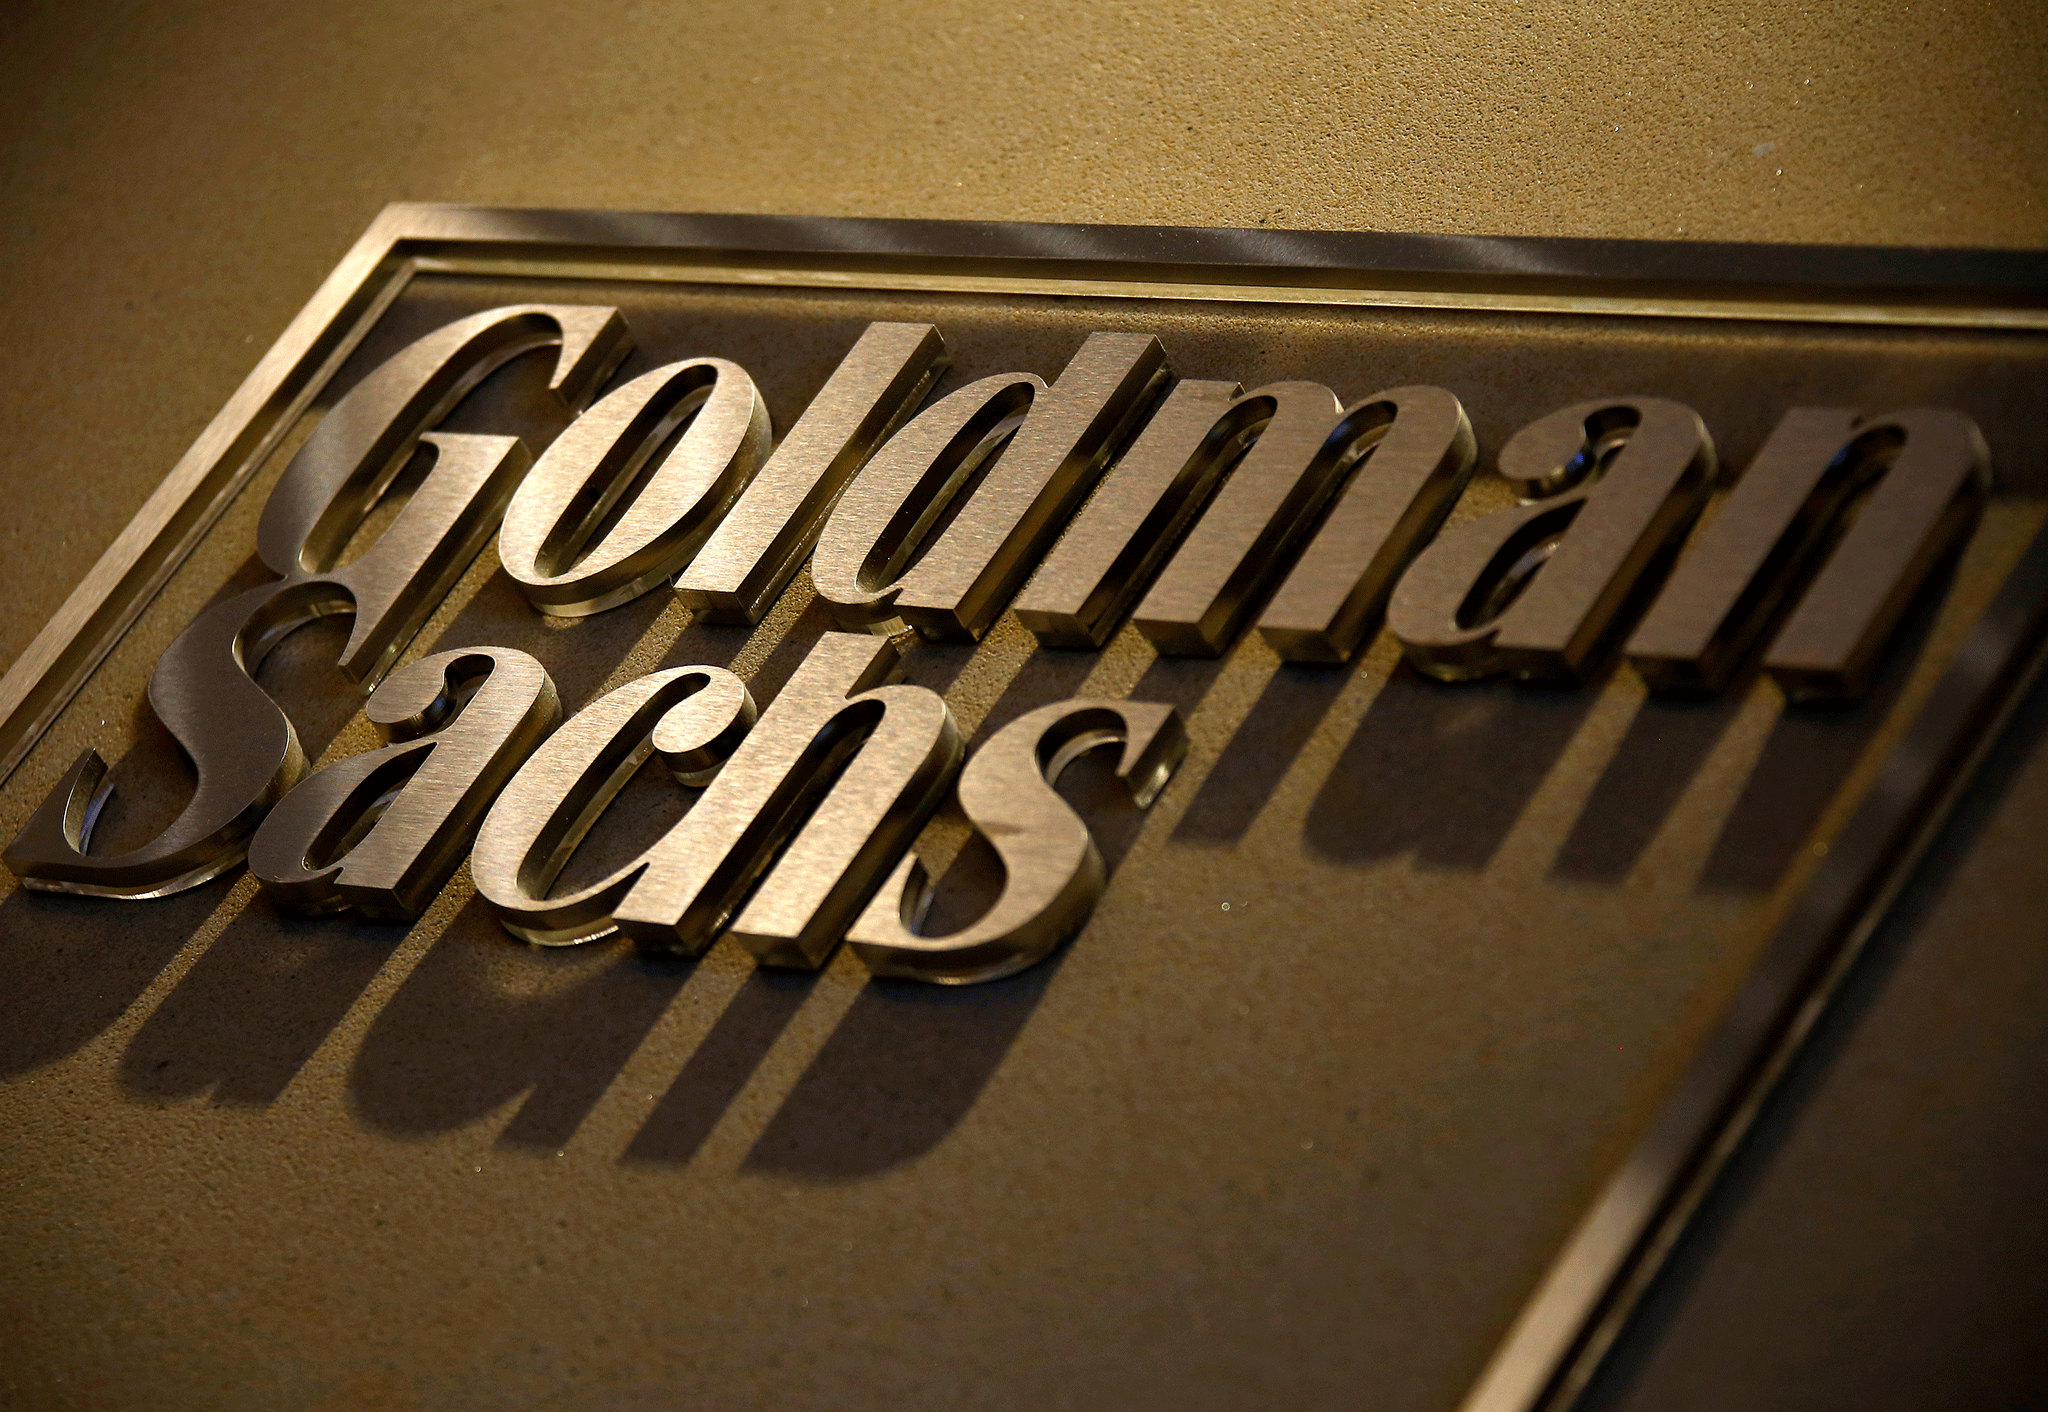 Goldman Sachs considers moving half its London jobs because of Brexit